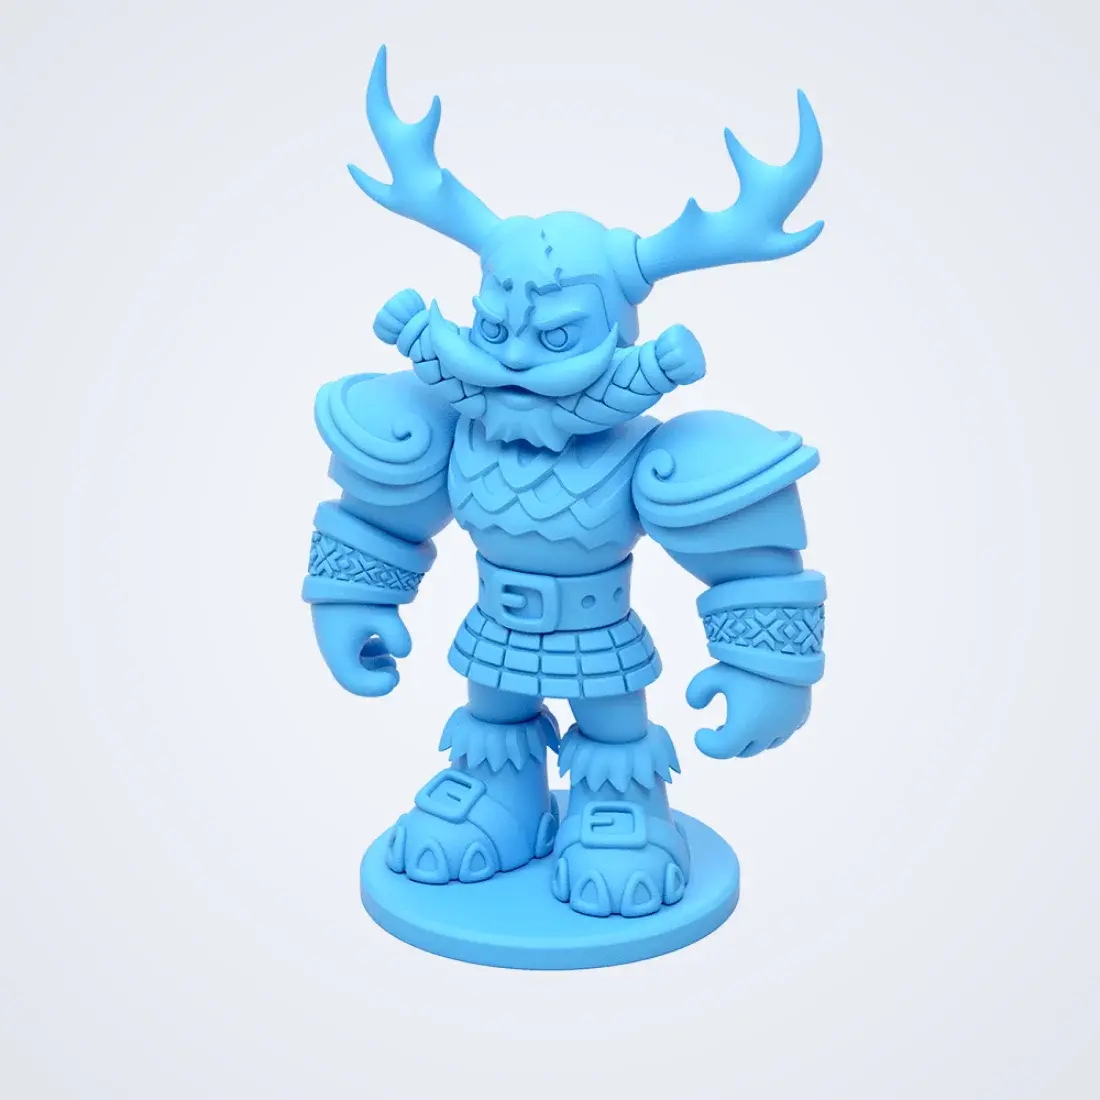 Toogle toy 3D character 6 by devabit